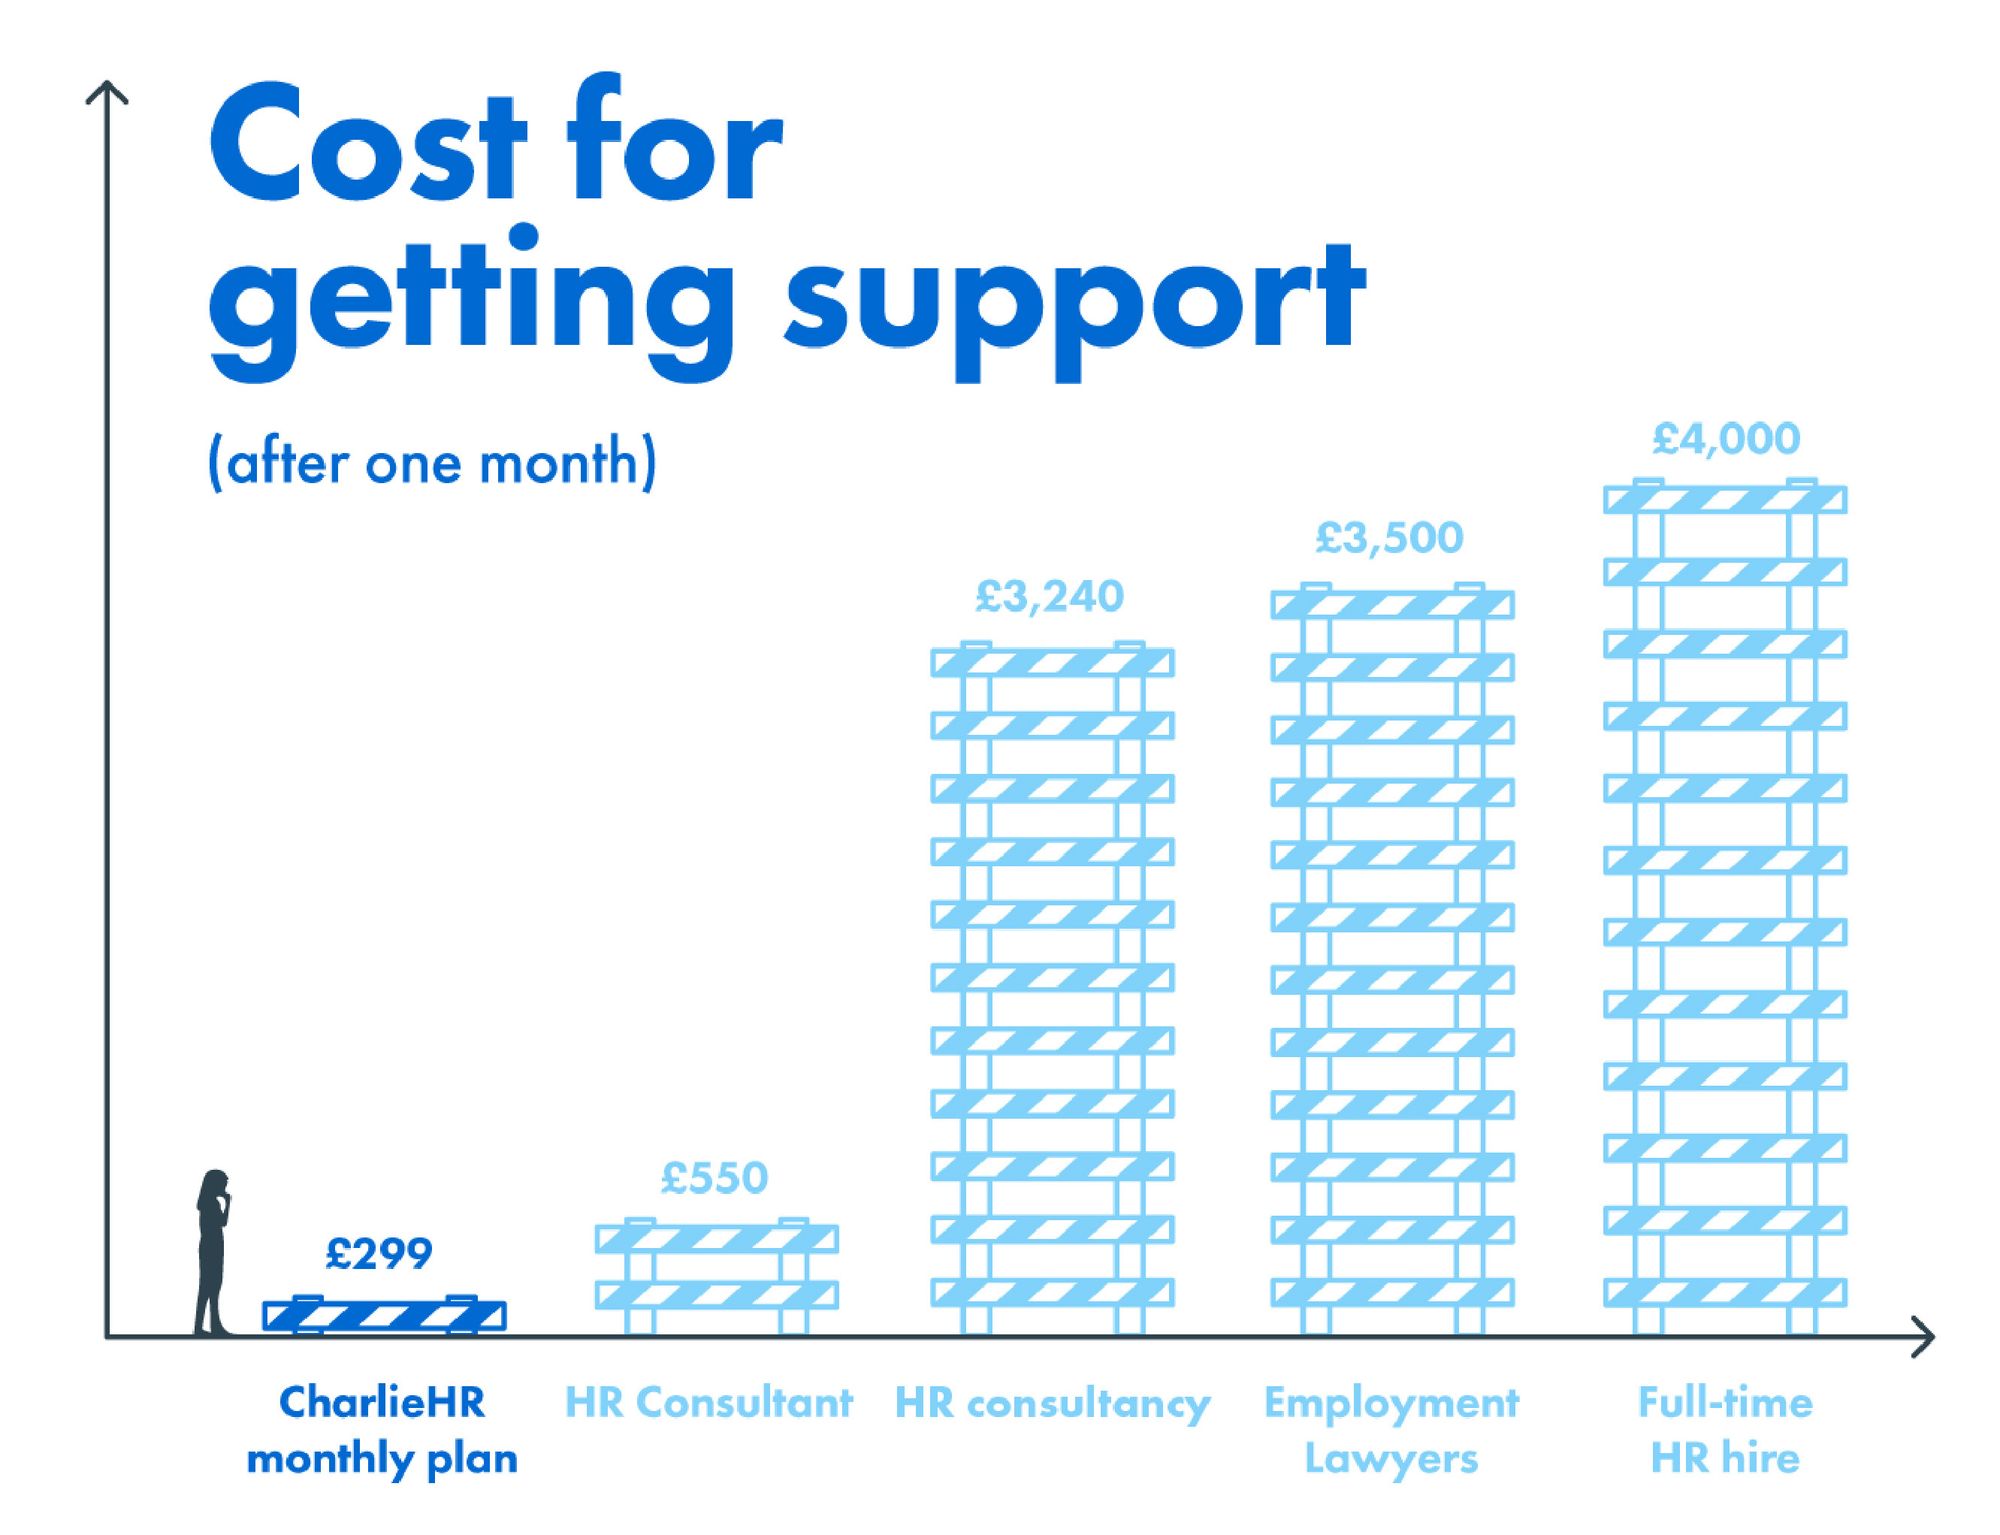 Comparison table of the cost of getting support for a business - £299 for CharlieHR against £4000 for a full time hire and more expensive for other solutions